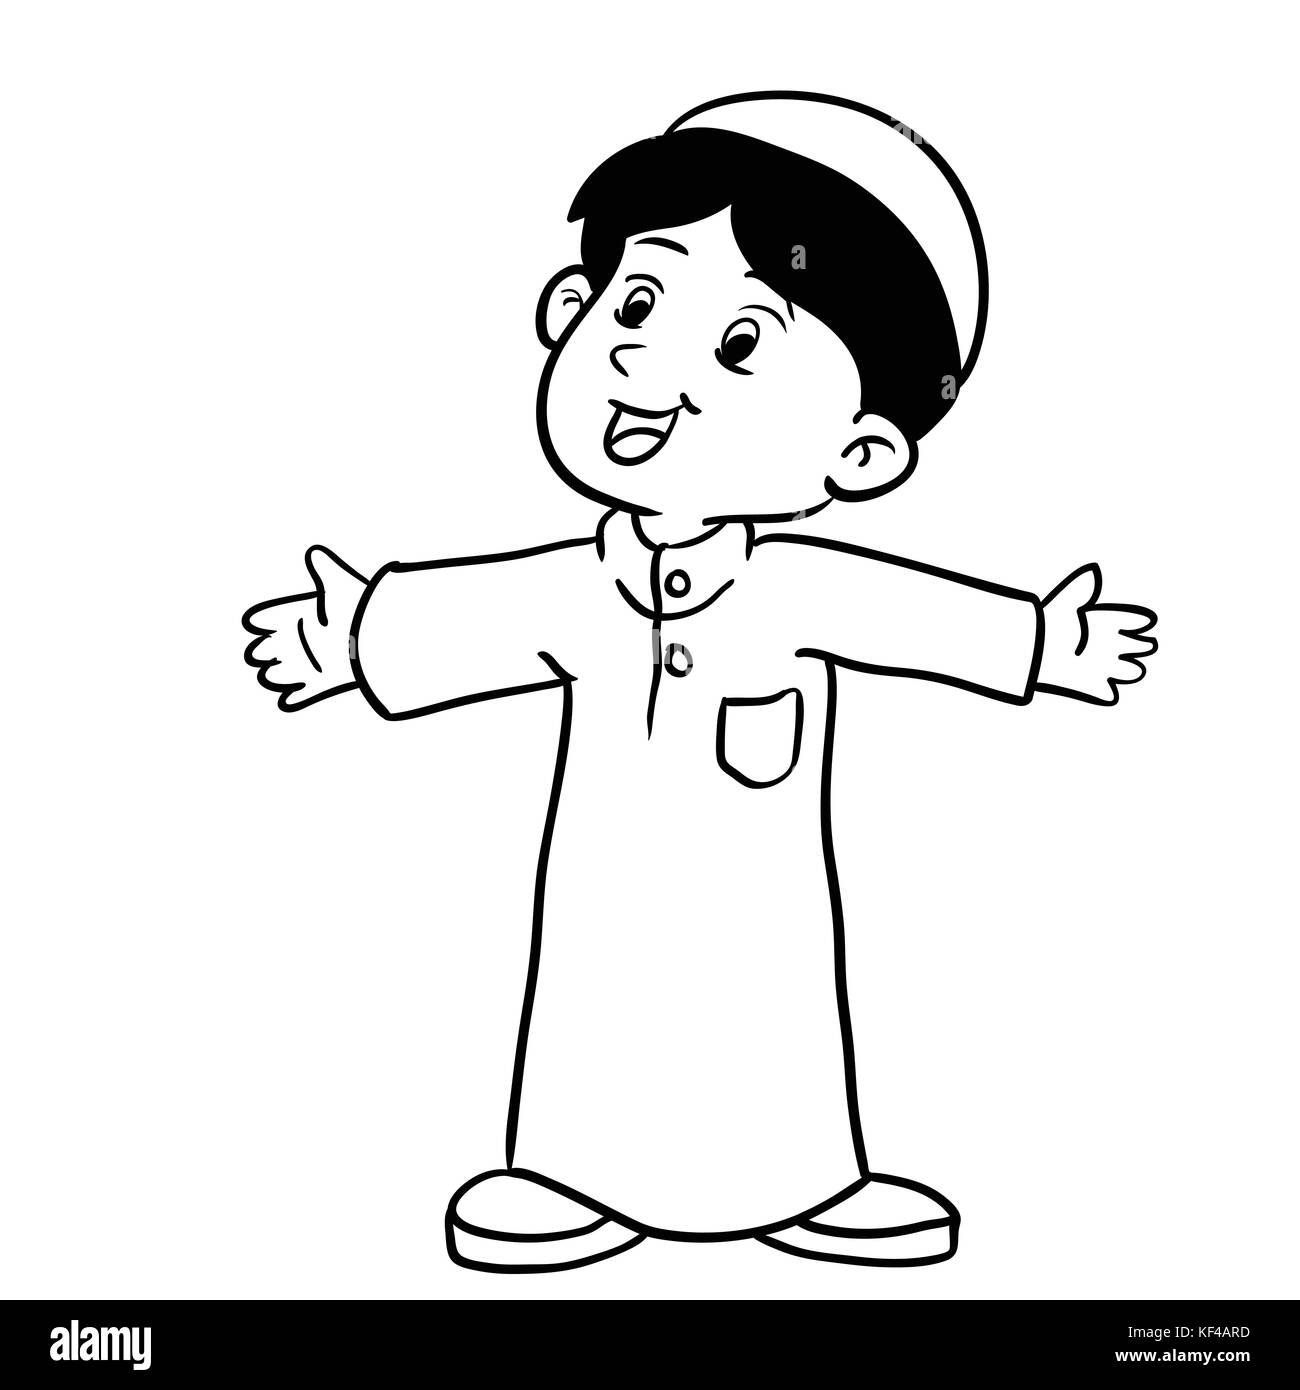 Illustration of Happy Muslim Boy standing, Hand drawing style for coloring book-Vector Illustration Stock Vector